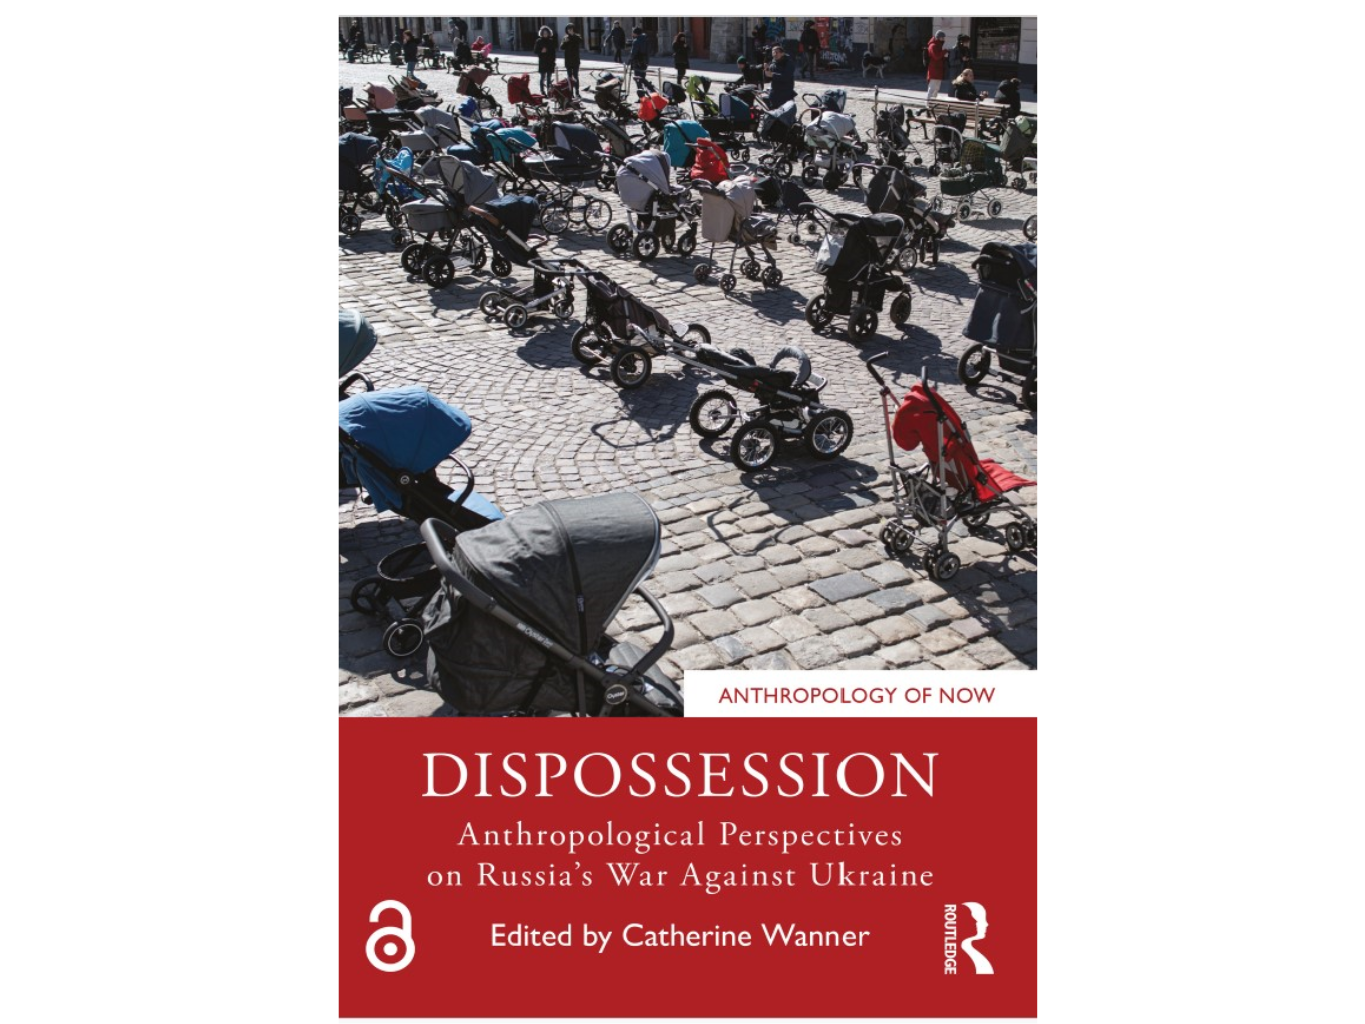 Book Launch: Dispossession: Anthropological Perspectives on Russia’s War Against Ukraine